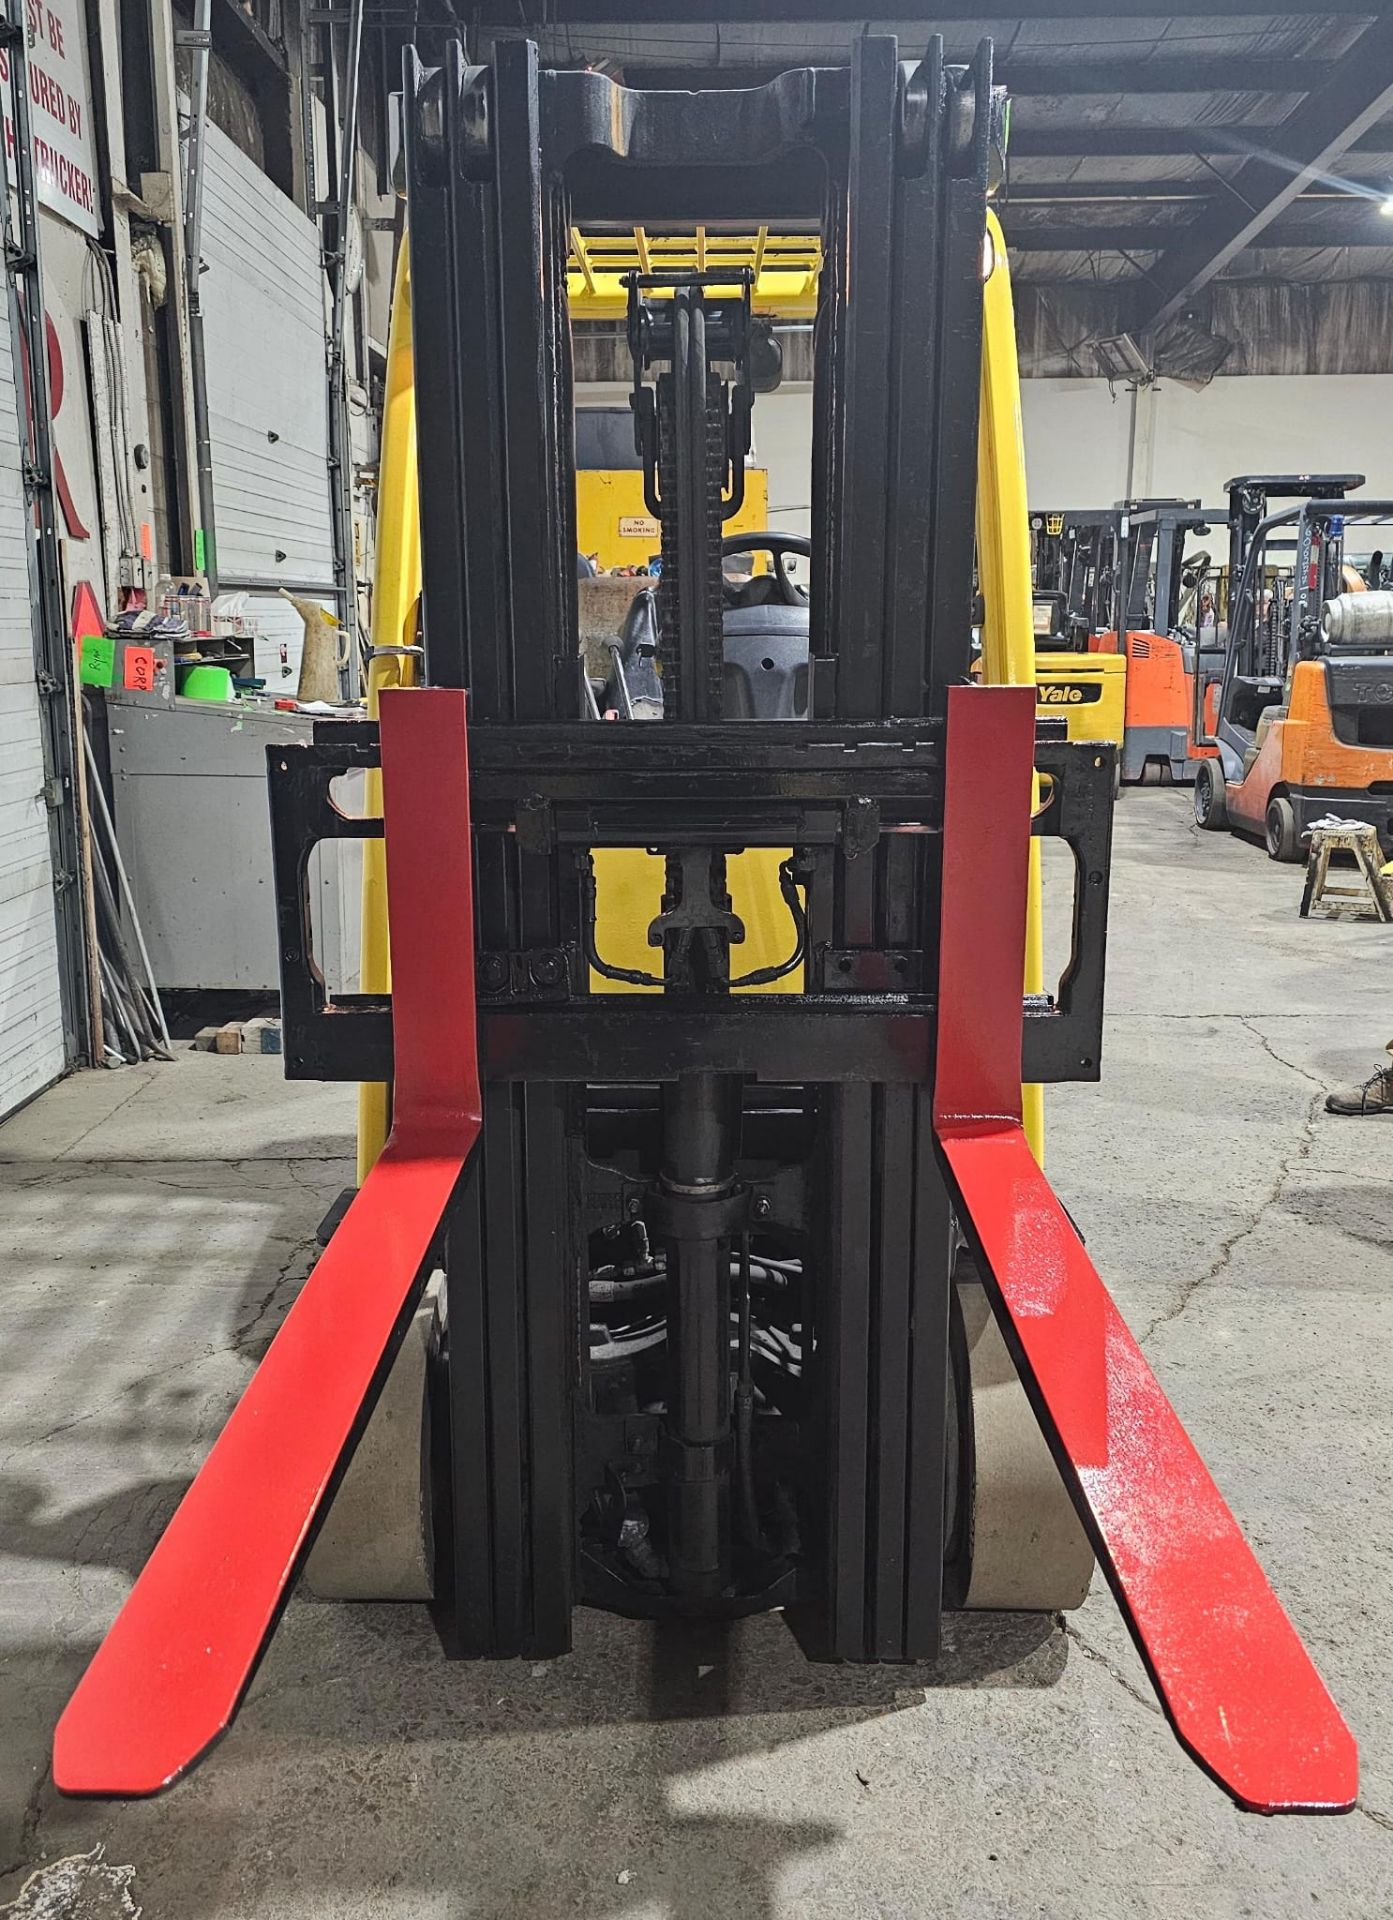 2015 Hyster 5,000lbs Capacity LPG (Propane) Forklift with sideshift & 3-STAGE MAST & Non marking - Image 3 of 4